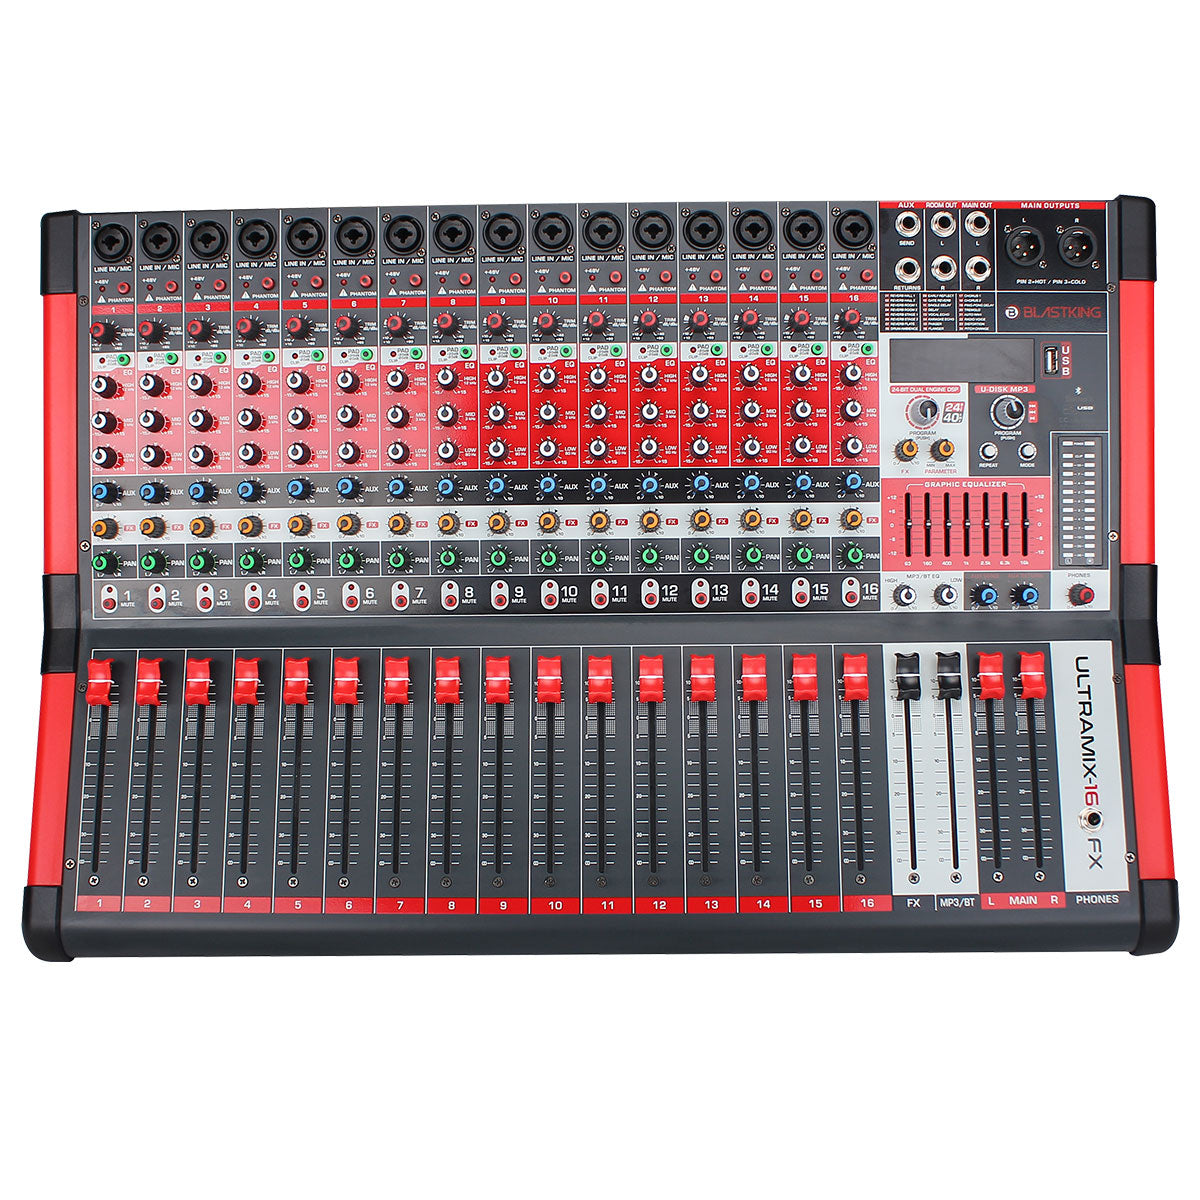 Blastking 16 Channel Analog Stereo Mixing Console – ULTRAMIX-16FX